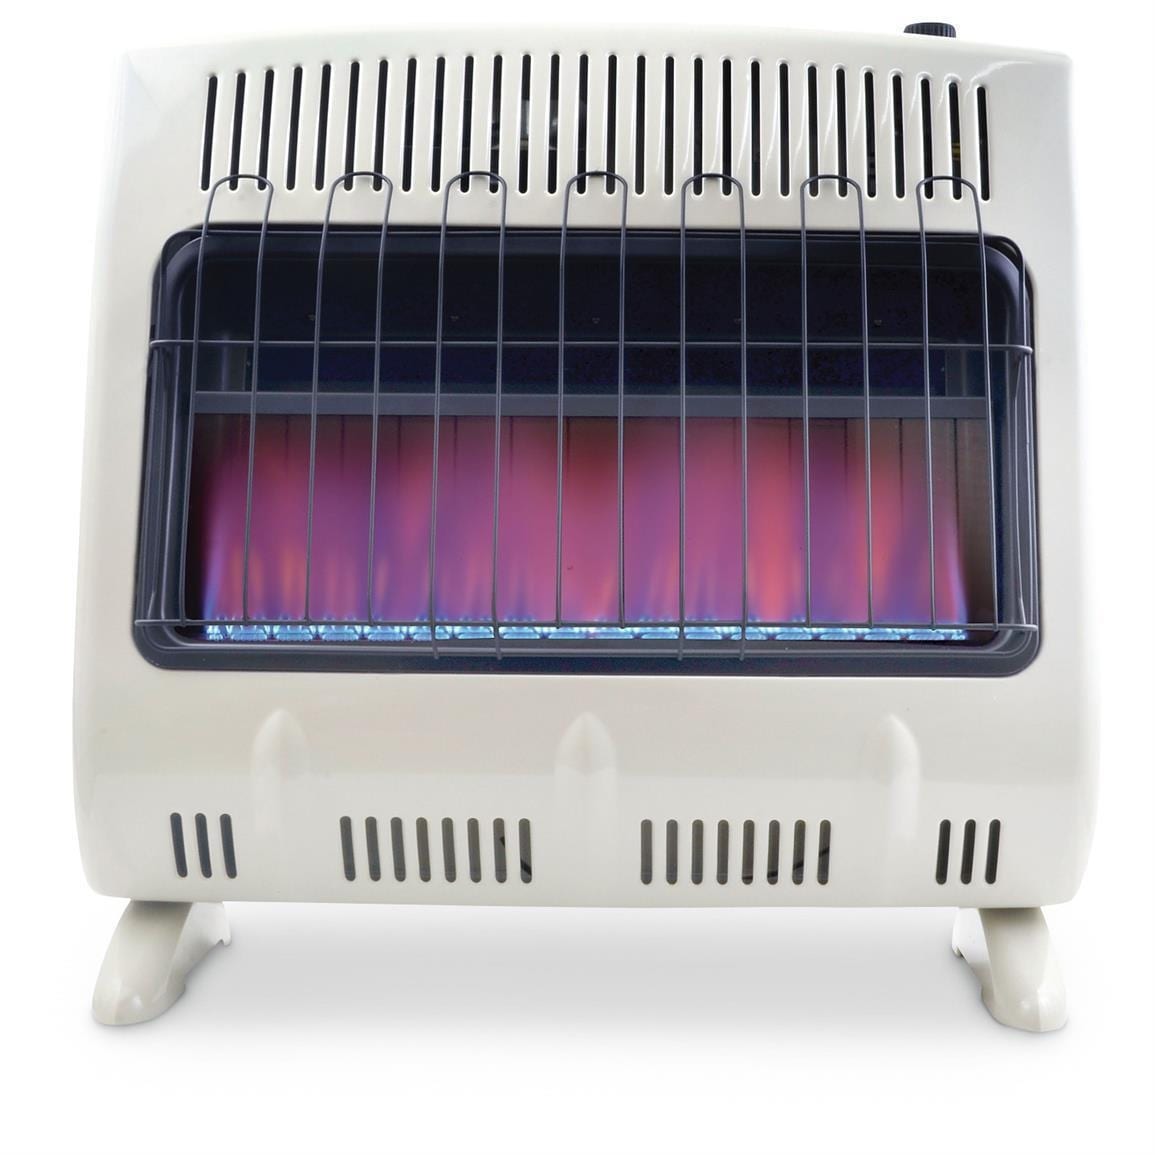 https://ak1.ostkcdn.com/images/products/is/images/direct/69fec83d2d18073405ca425b2fa028a23890e999/Mr.-Heater-30K-BTU-Blue-Flame-Vent-Free-Heater-with-Blower-and-Hose.jpg